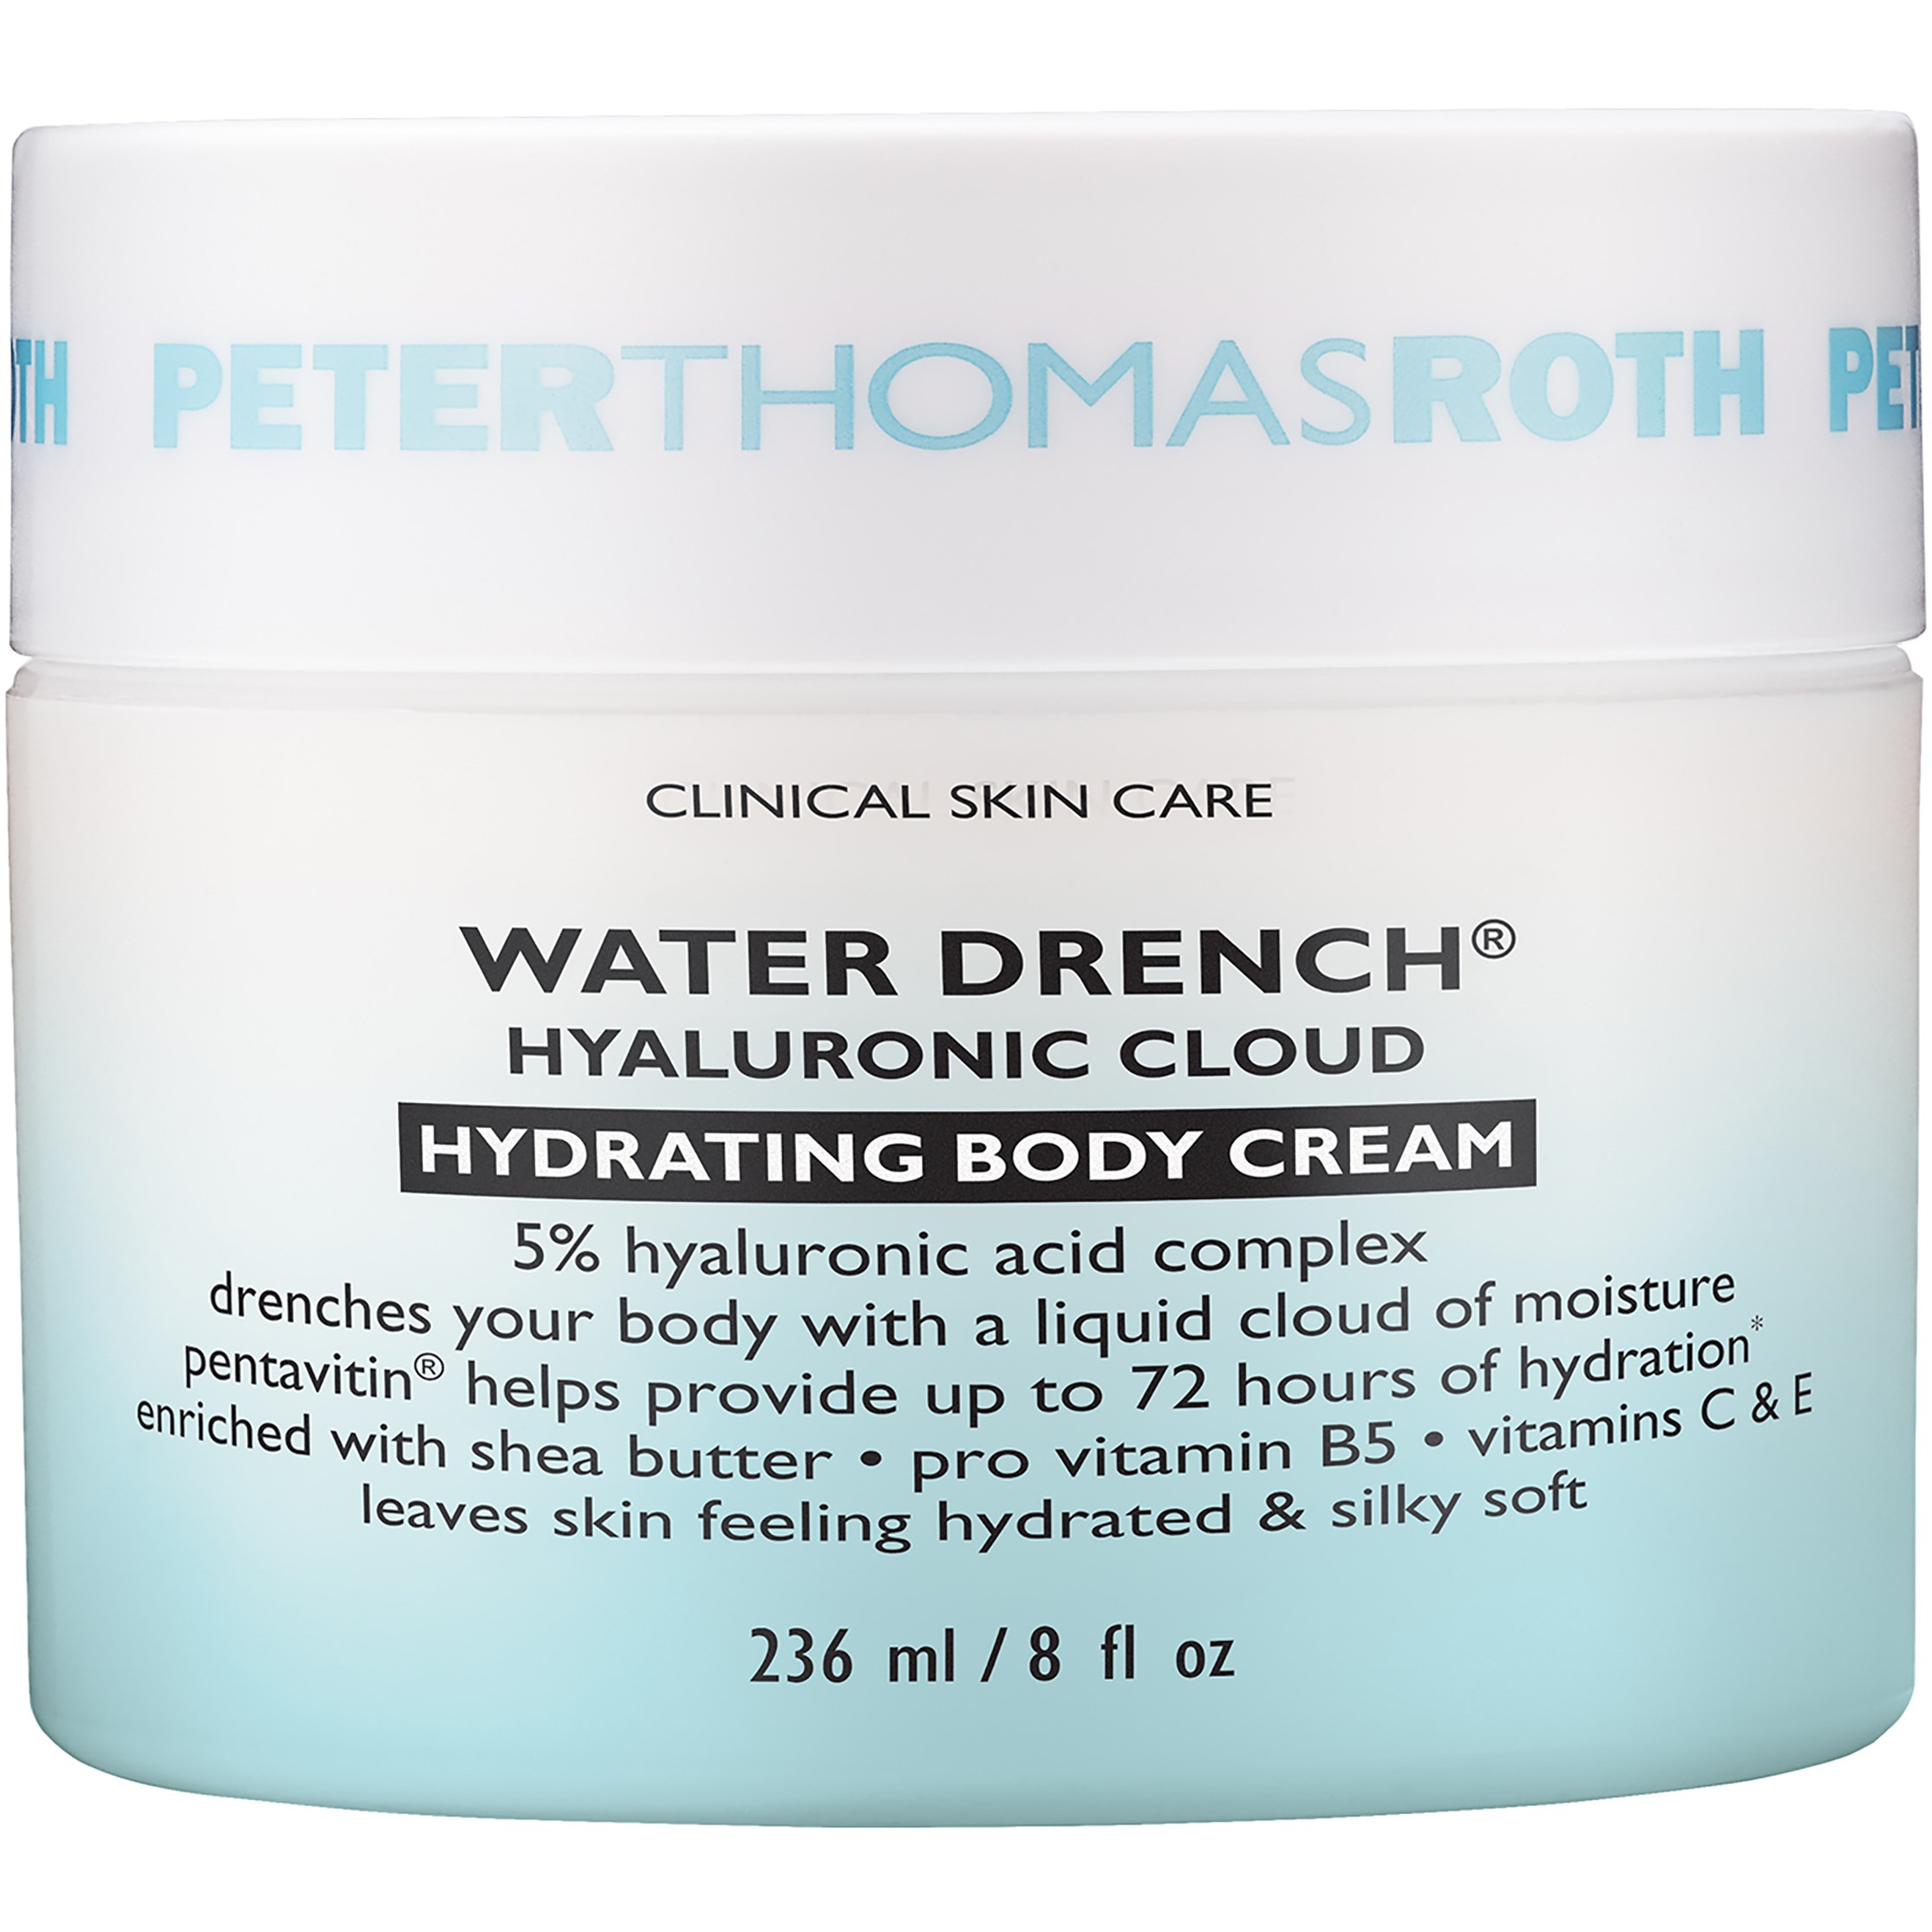 Läs mer om Peter Thomas Roth Water Drench® Hyaluronic Cloud Hydrating Body Cream